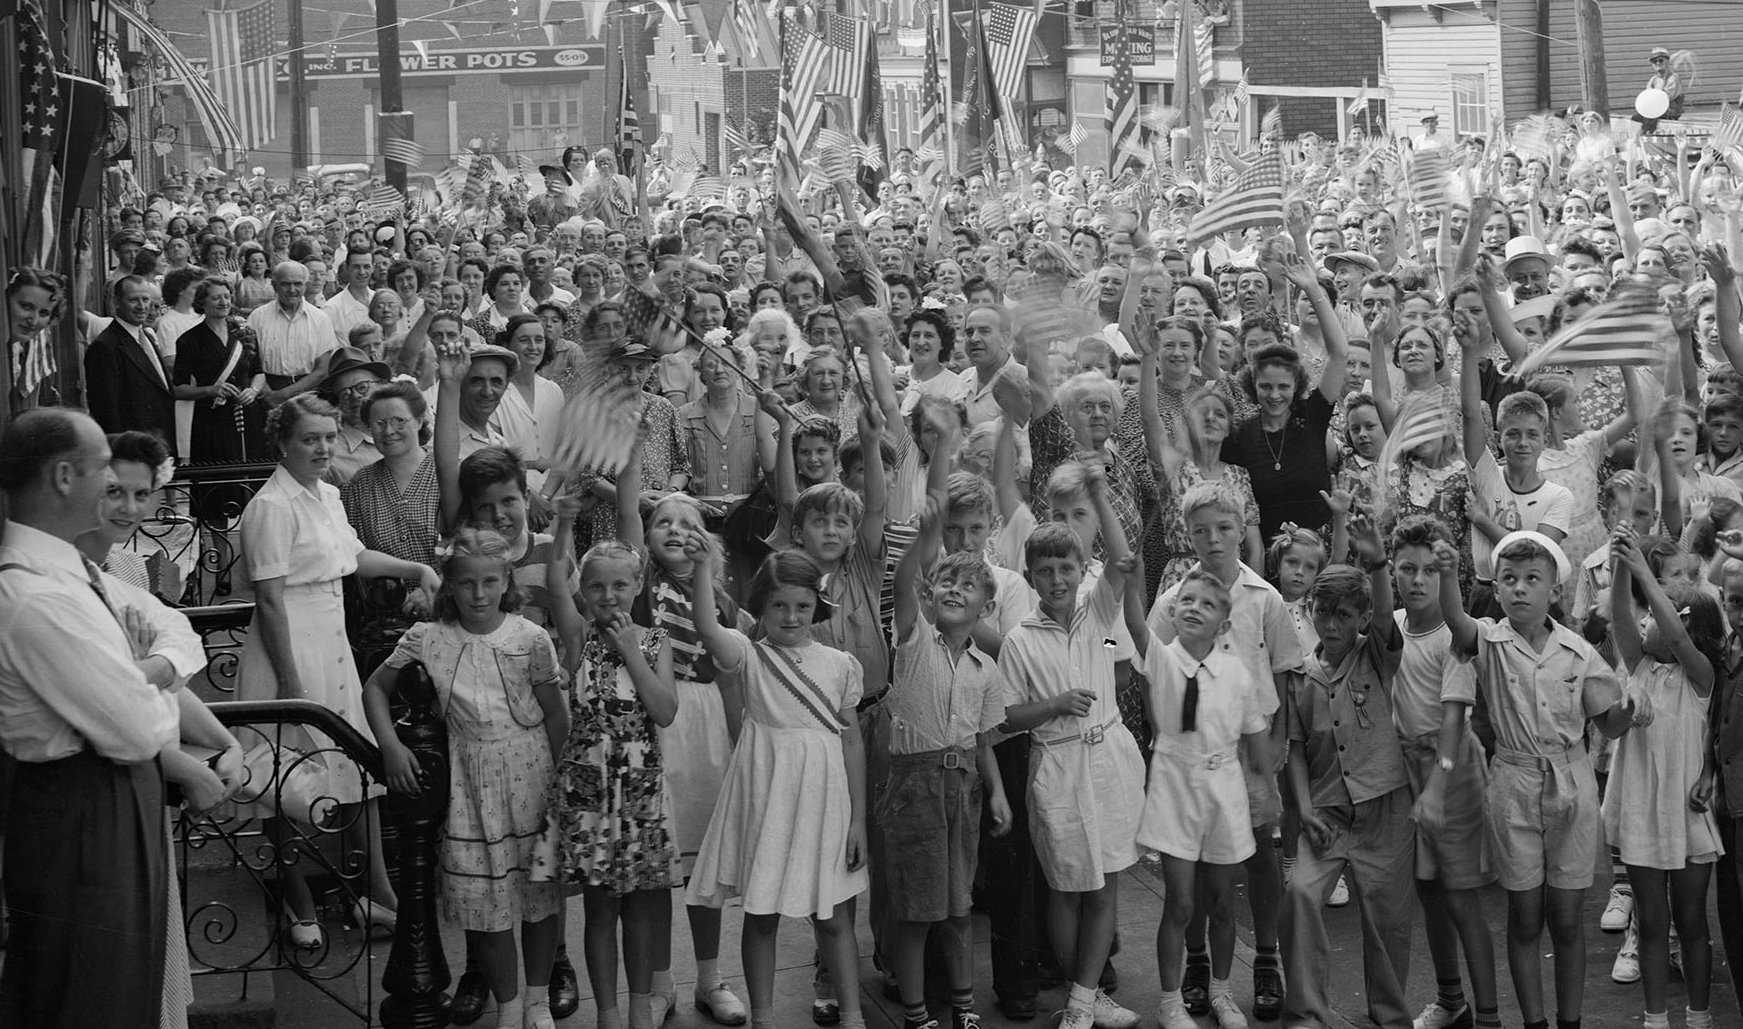 At the height of World War II, this patriotic crowd gathered on 58th Road in Maspeth on Aug. 2, 1942 for a public celebration of the troops.